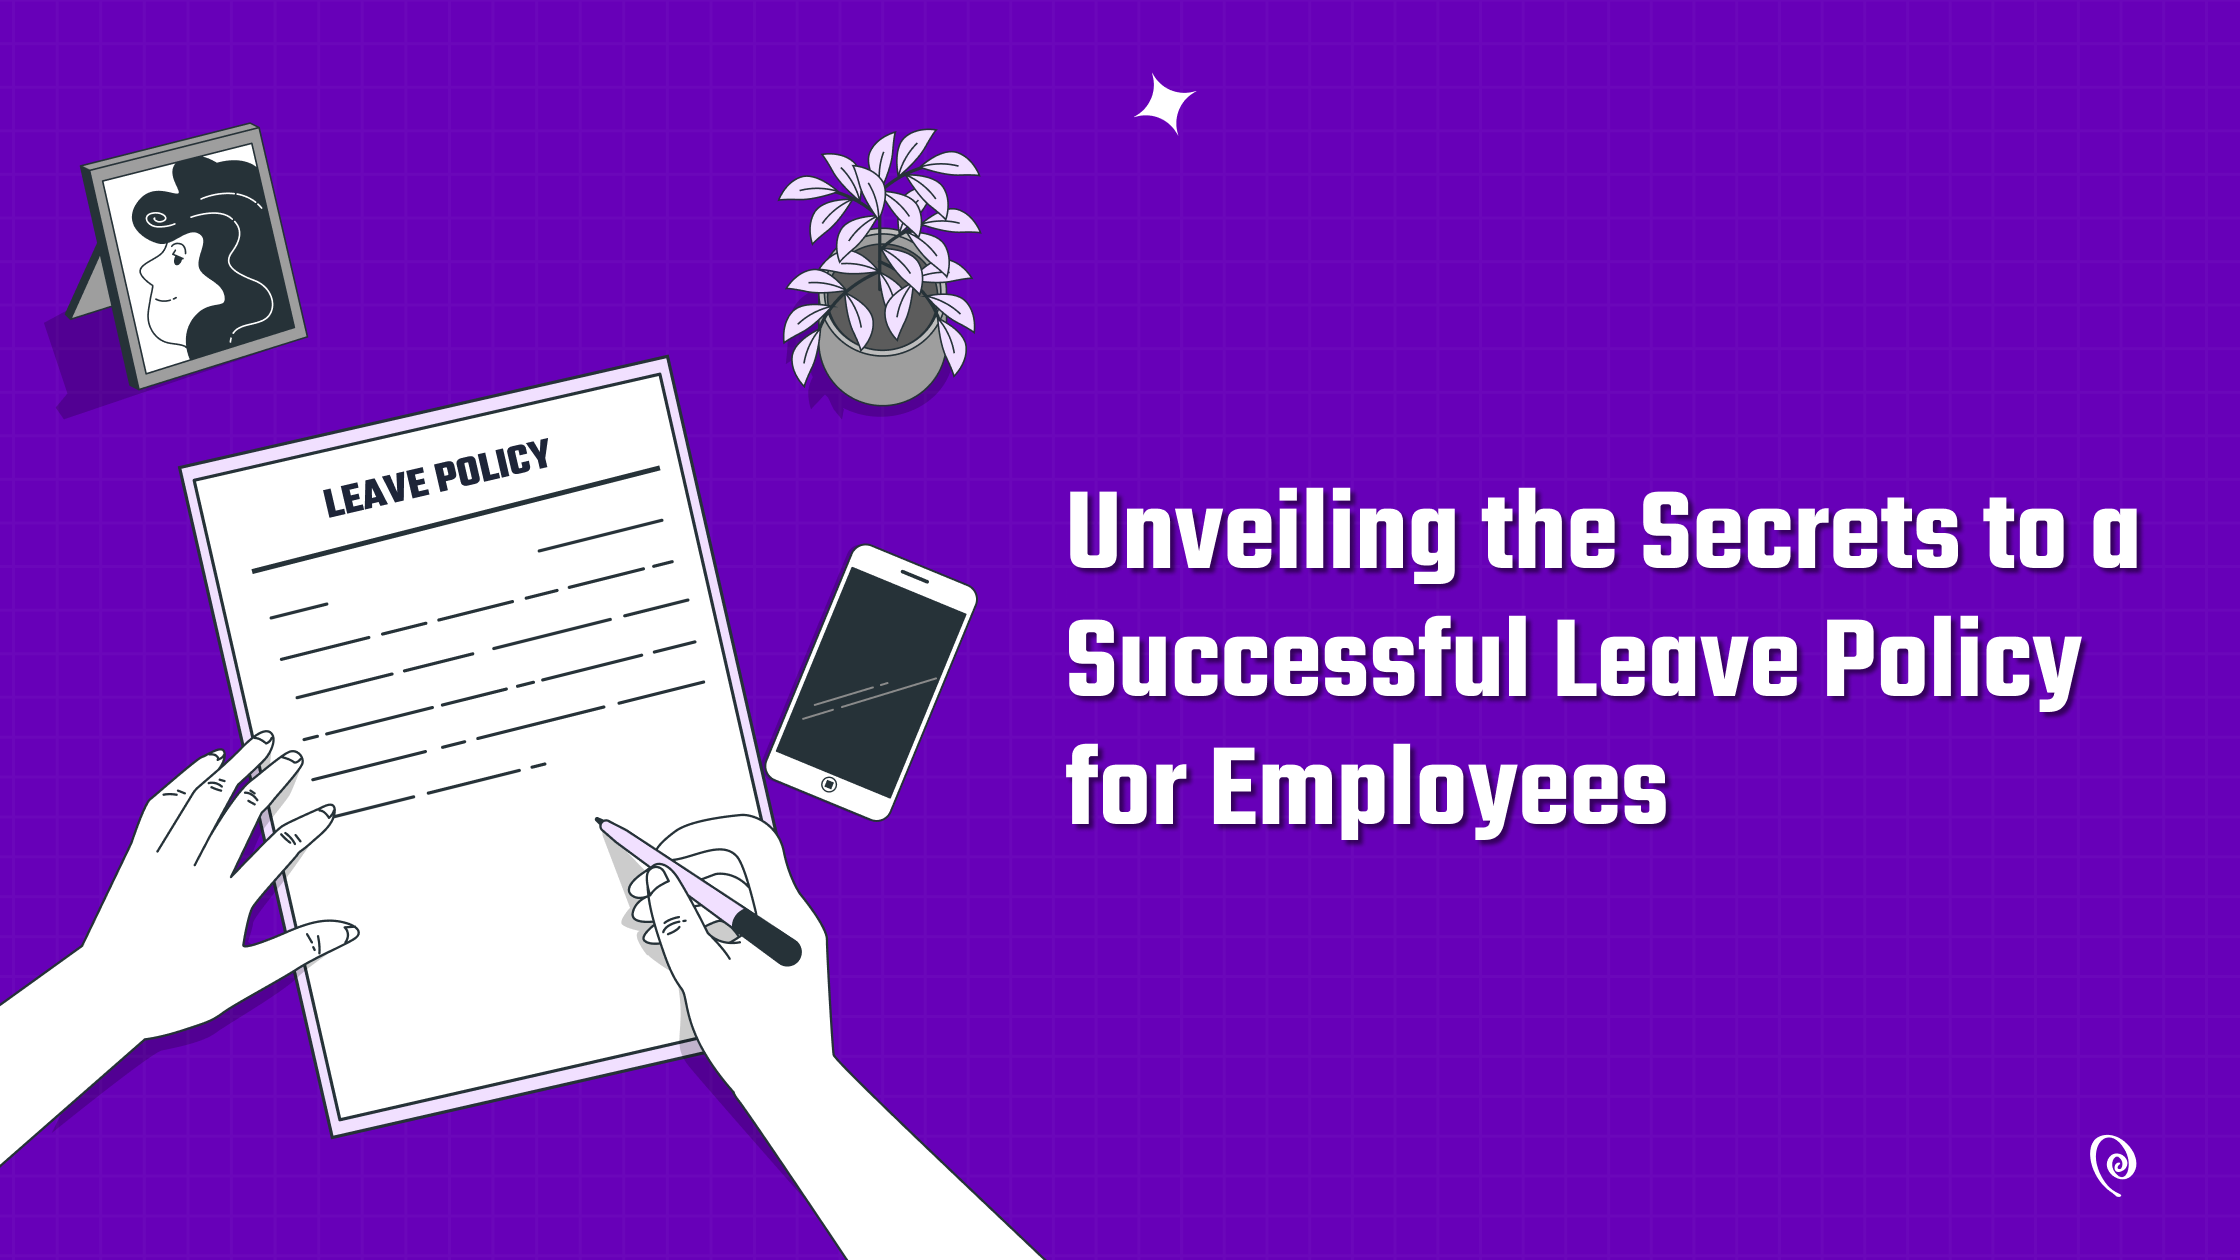 Unveiling the Secrets to a Successful Leave Policy for Employees